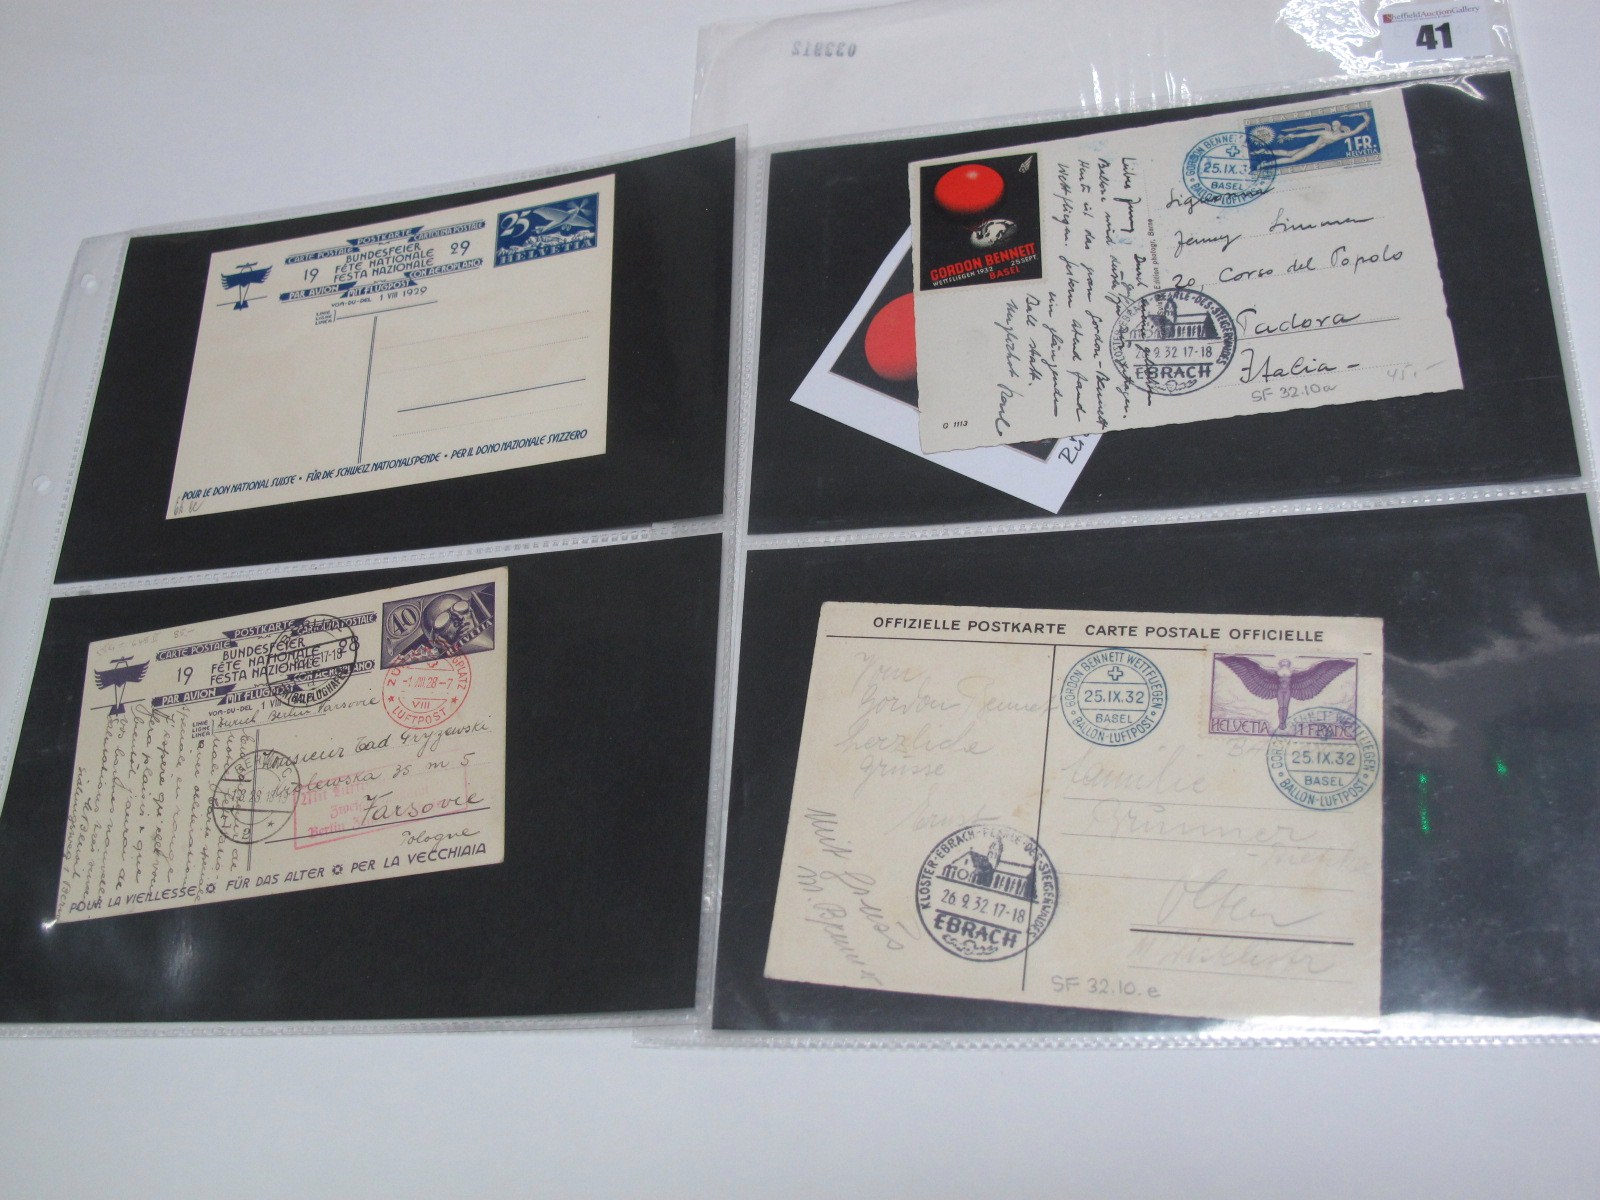 Switzerland - A Small Collection of Four Flight Cards, National Fete cards for 1928 (used) and